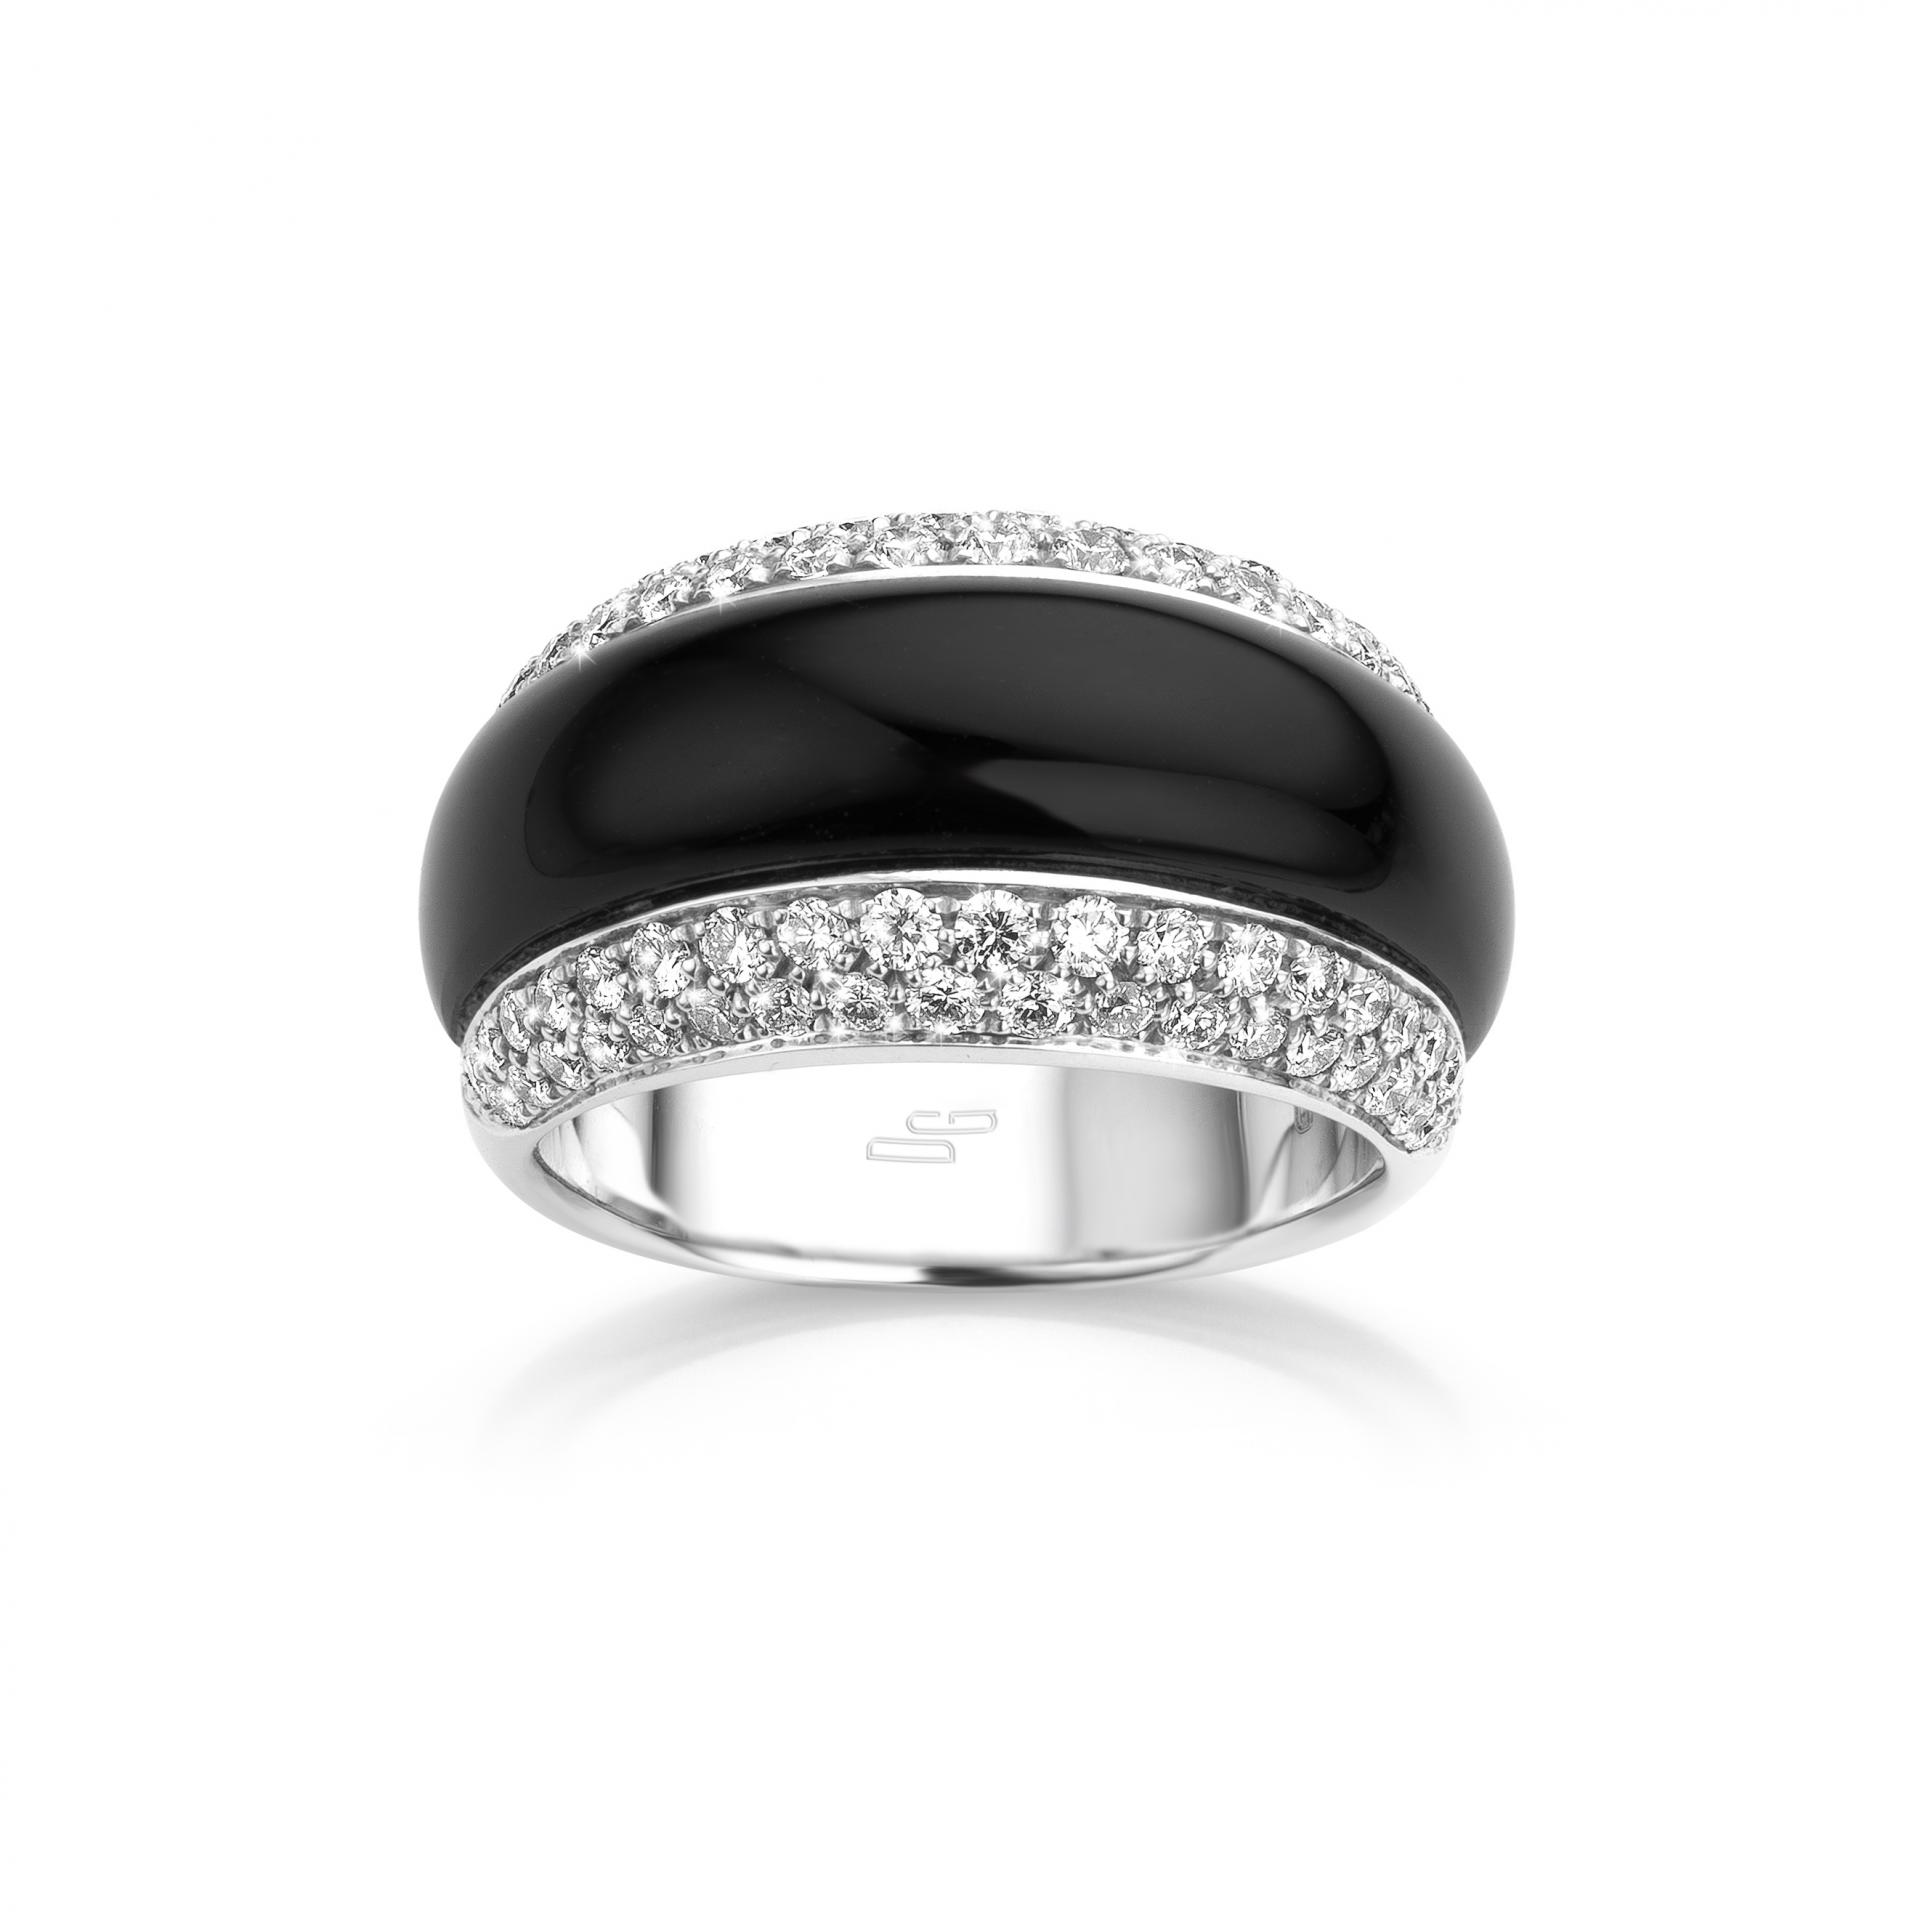 White gold ring set with an onyx and brilliant cut diamonds made by Maison De Greef